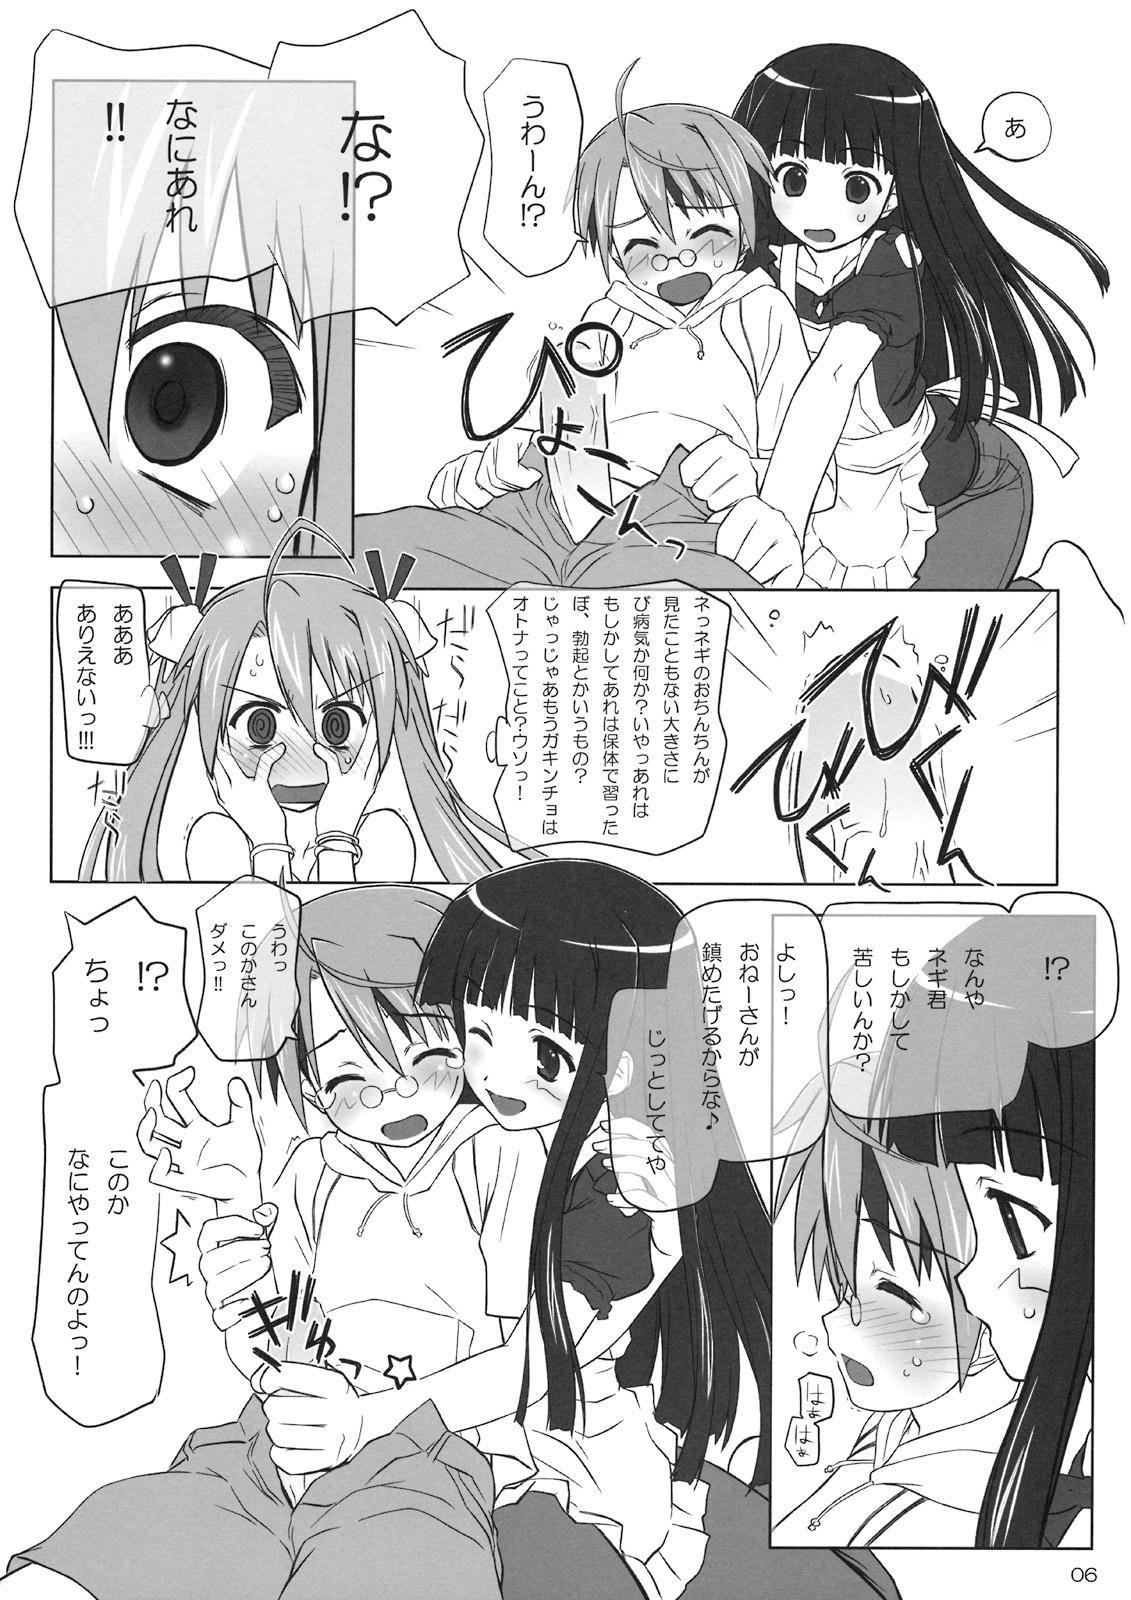 Married Dear My Little Witches 2nd - Mahou sensei negima Free Blowjob - Page 5